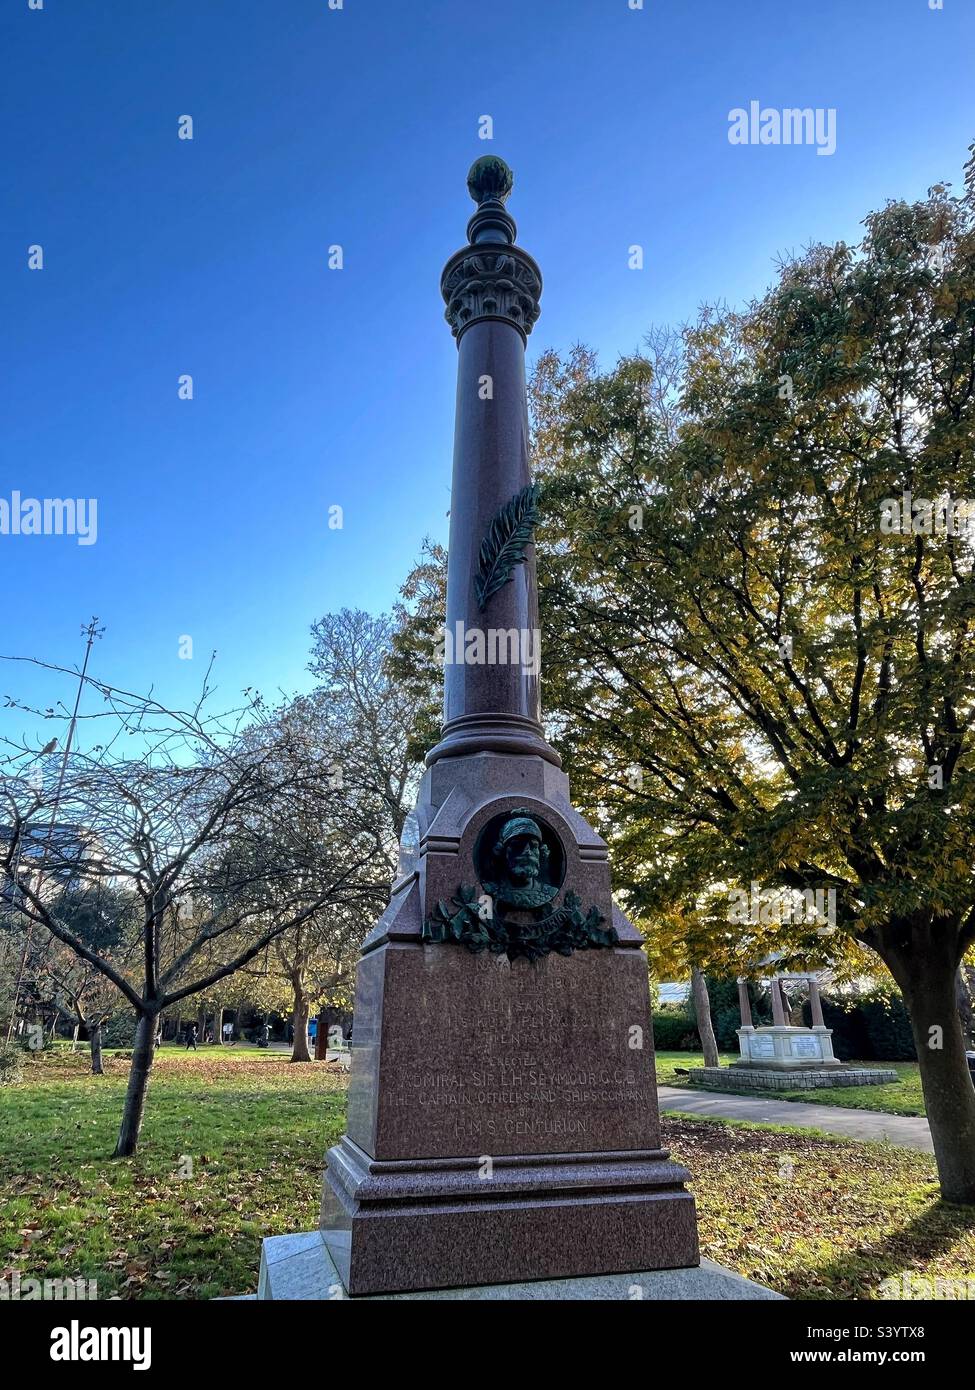 round column surmounted by sphere, white and red granite, head of centurion on round column dedicated to the crew of HMS Centurion who fought in China during the ‘Boxer Riots’ at the turn of C20th Stock Photo